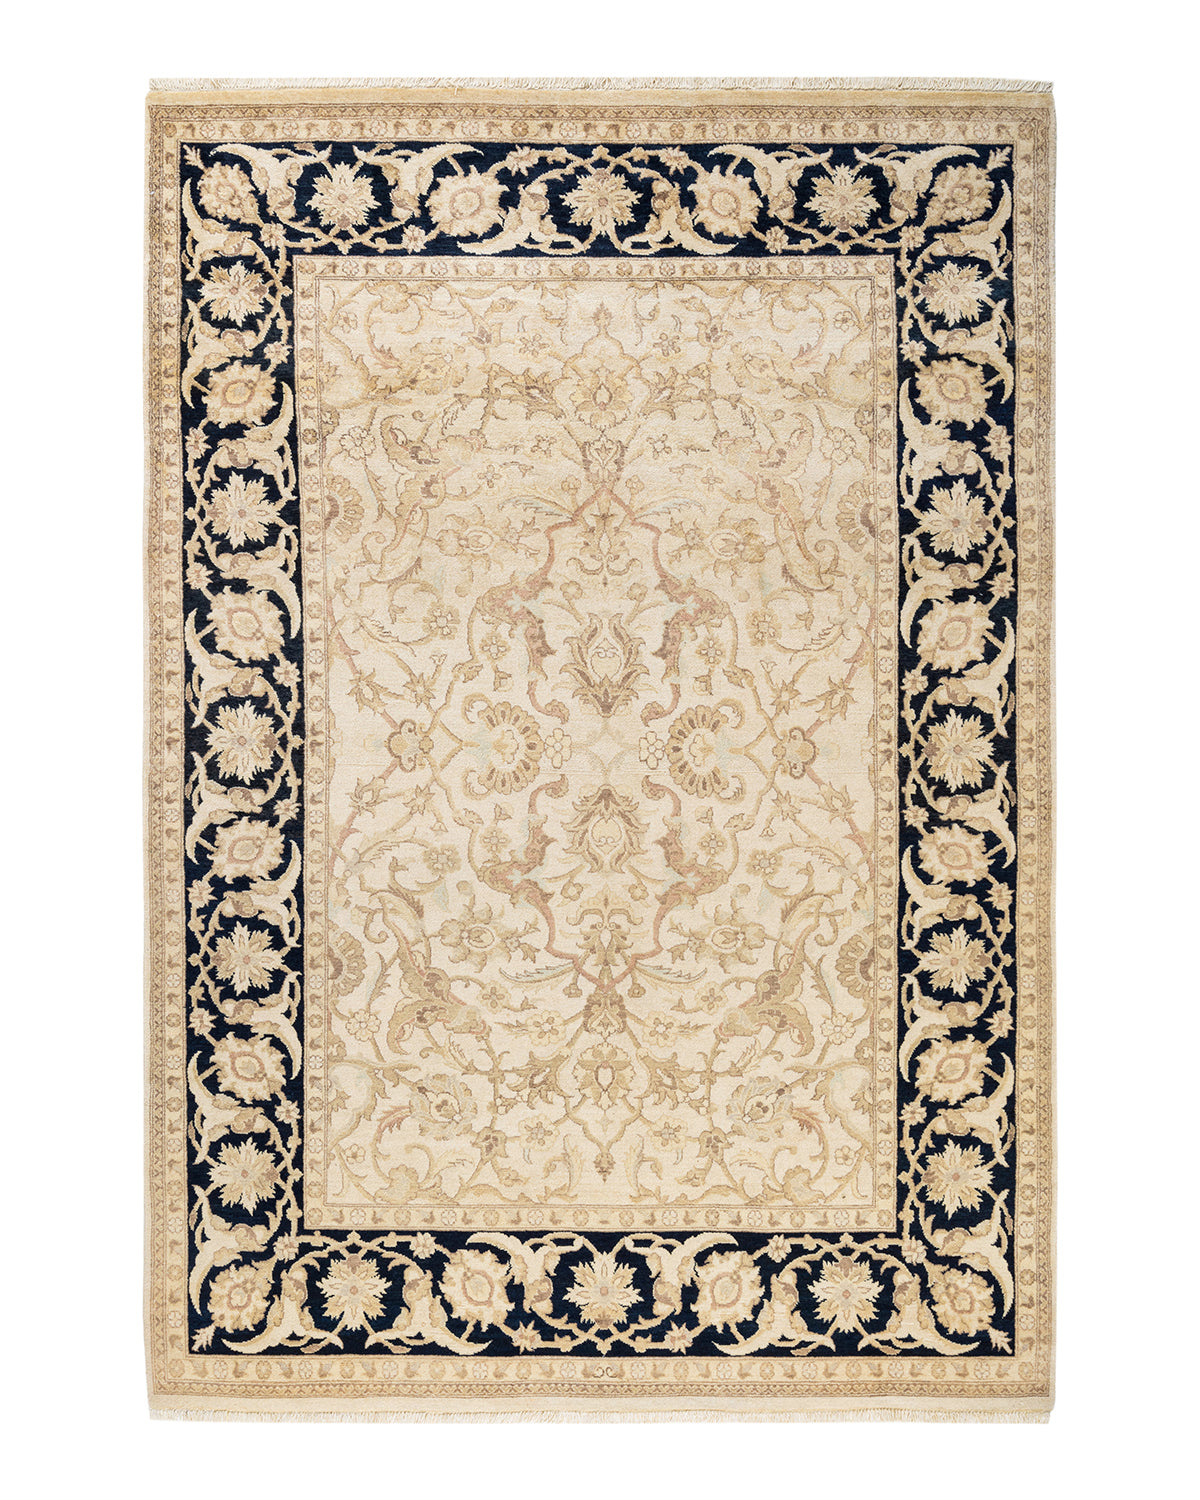 Eclectic, One-of-a-Kind Hand-Knotted Area Rug  - Ivory, 6' 2" x 8' 10"